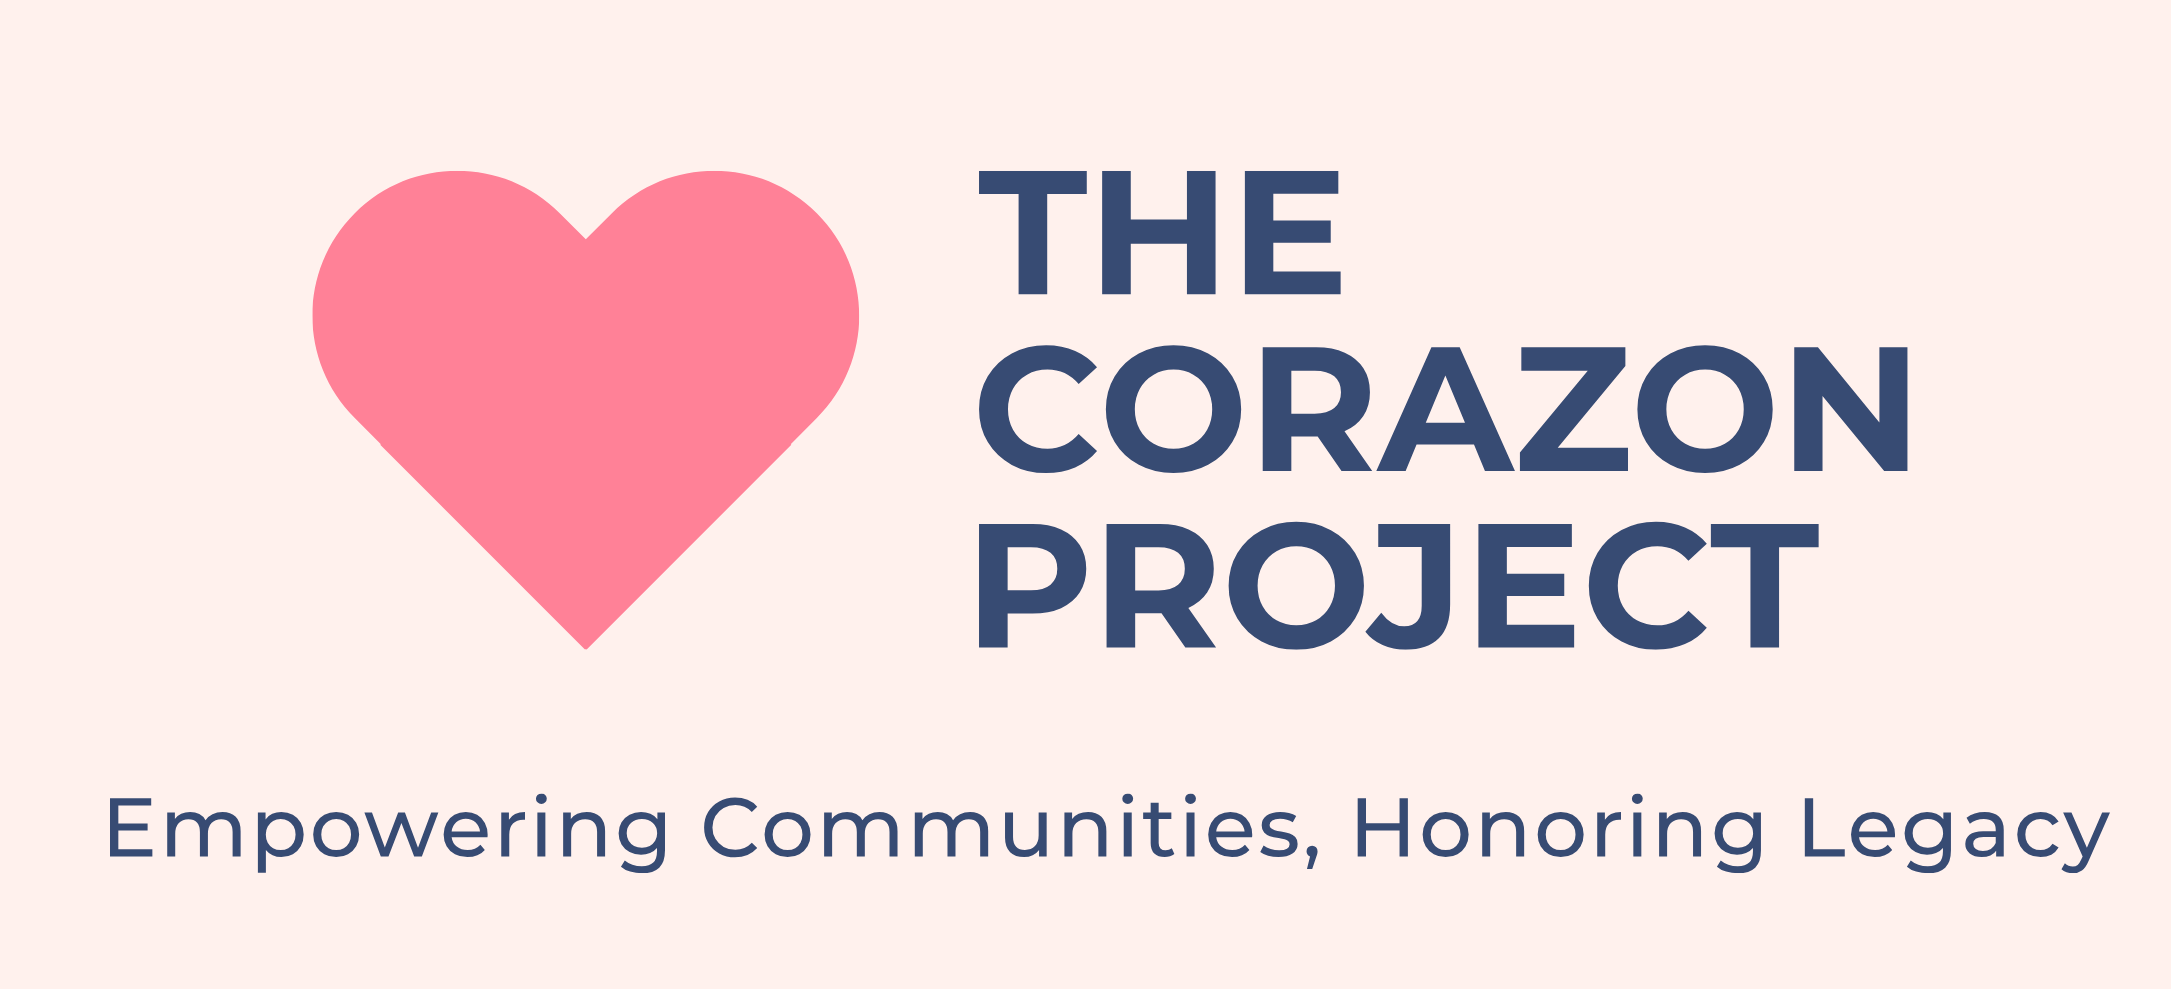 The Corazon Project logo